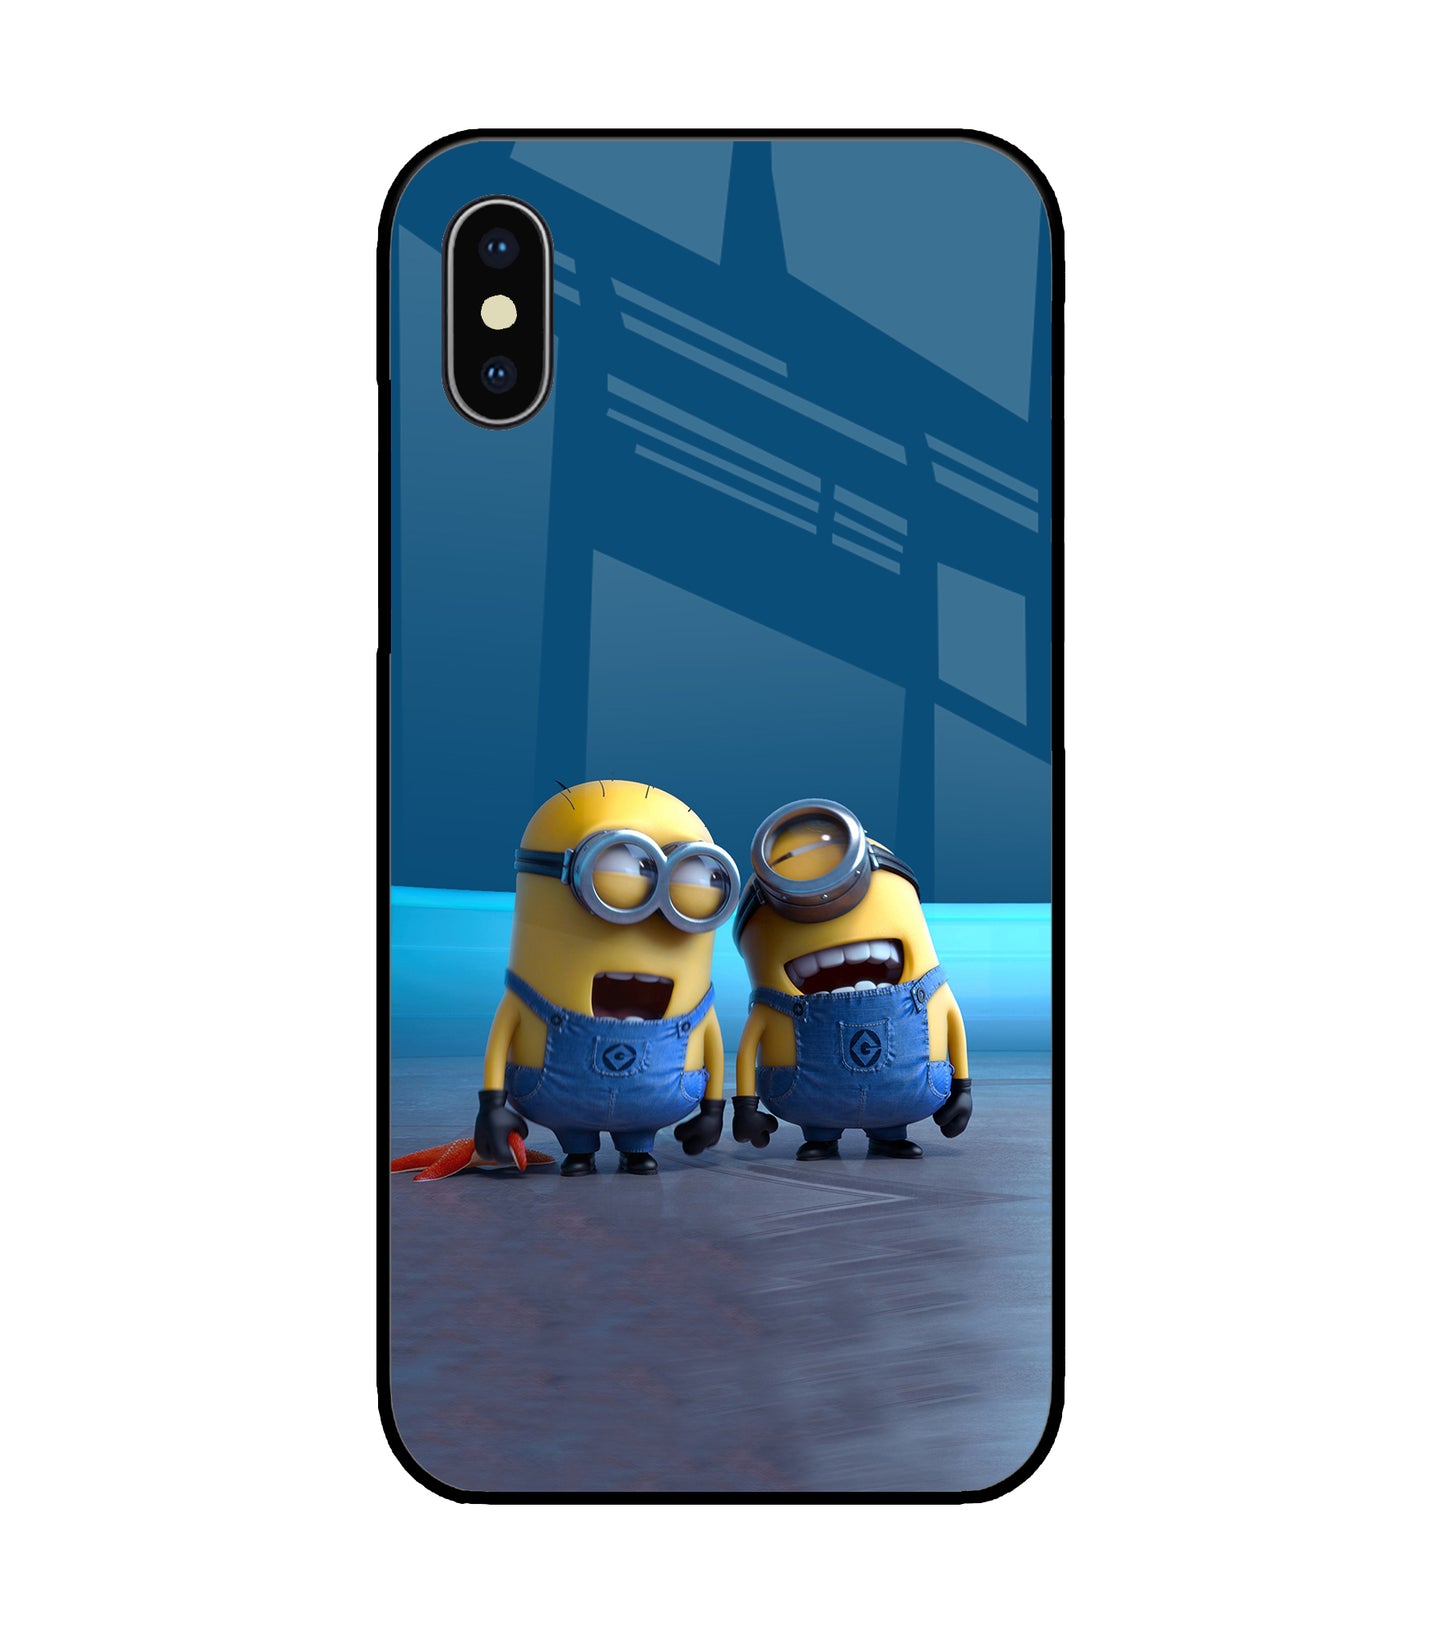 Minion Laughing iPhone X Glass Cover